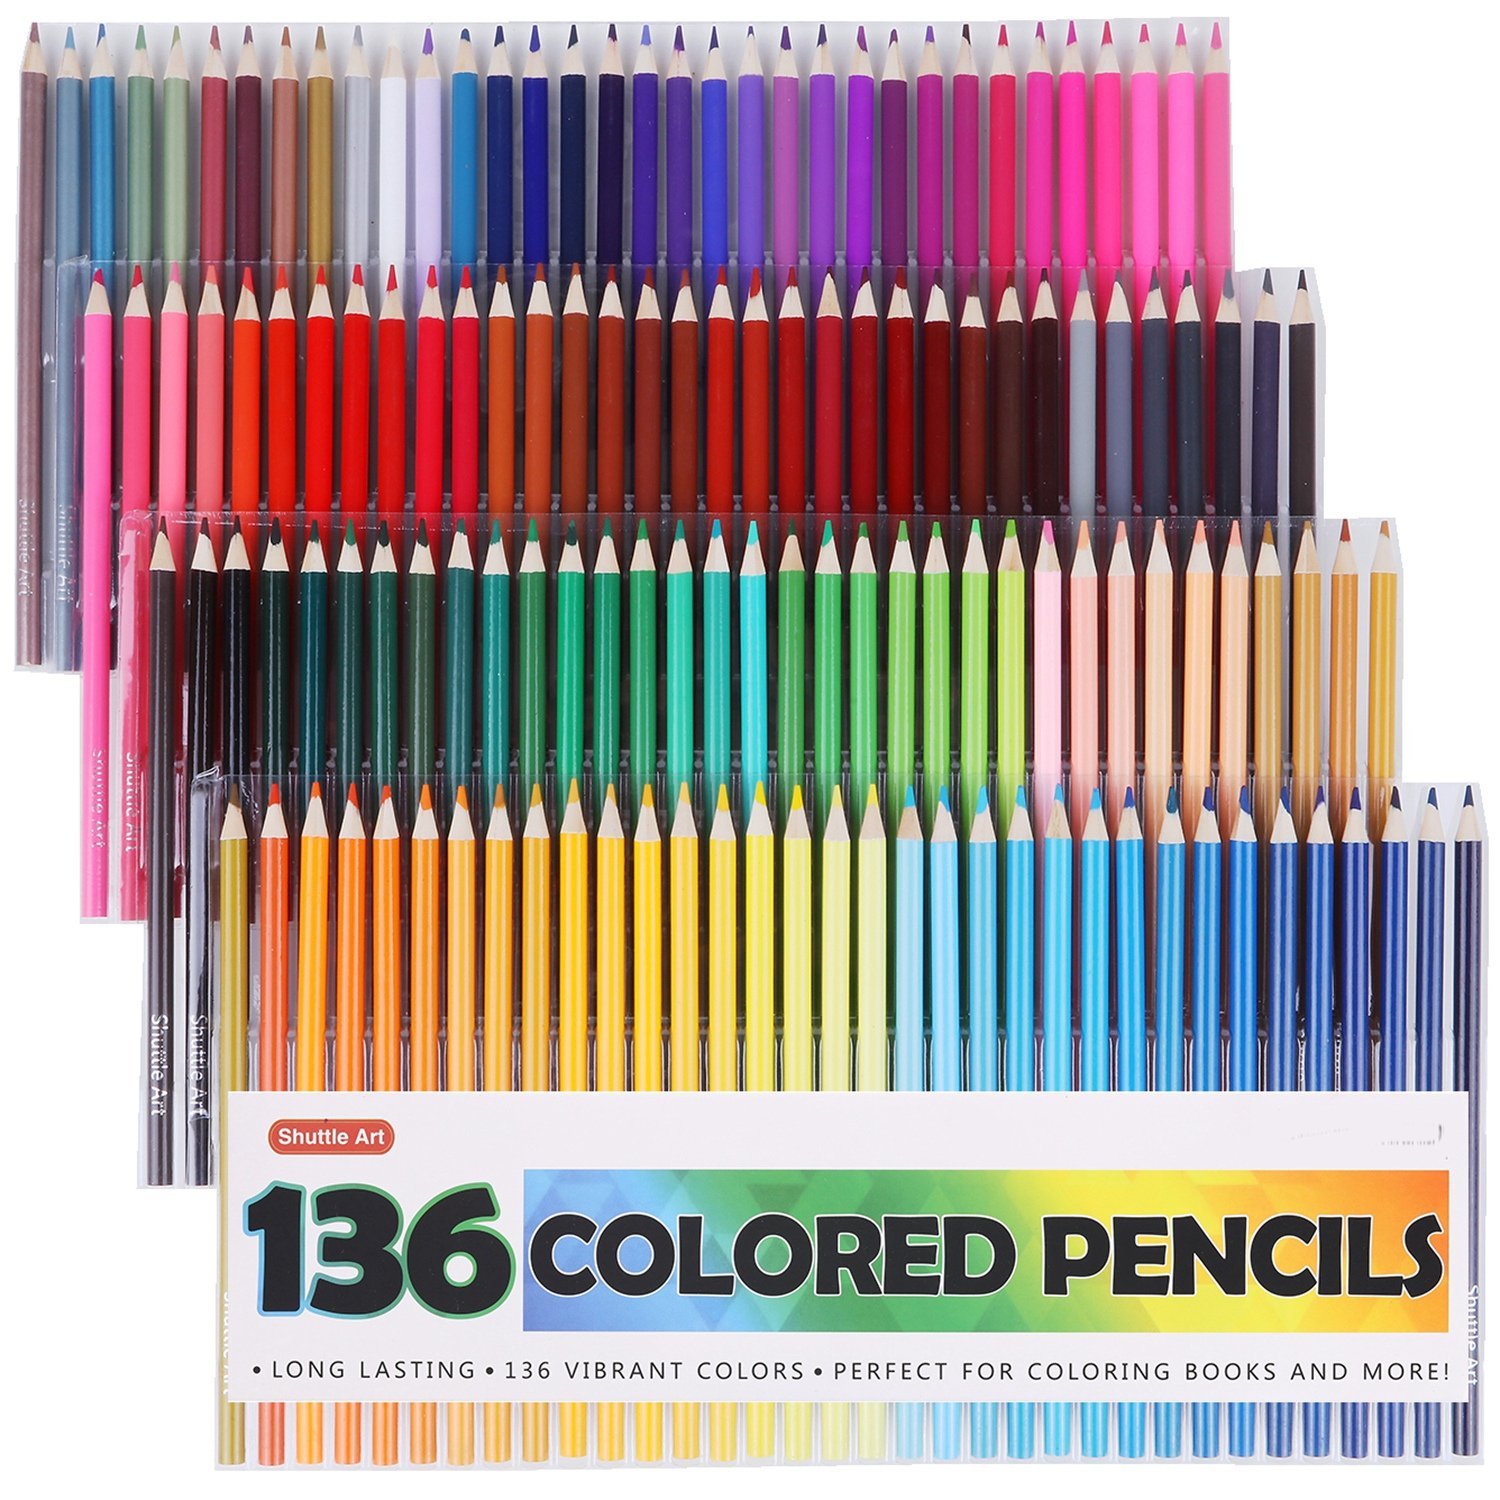 Download Shuttle Art 136 Colored Pencils Set for Adult Coloring ...